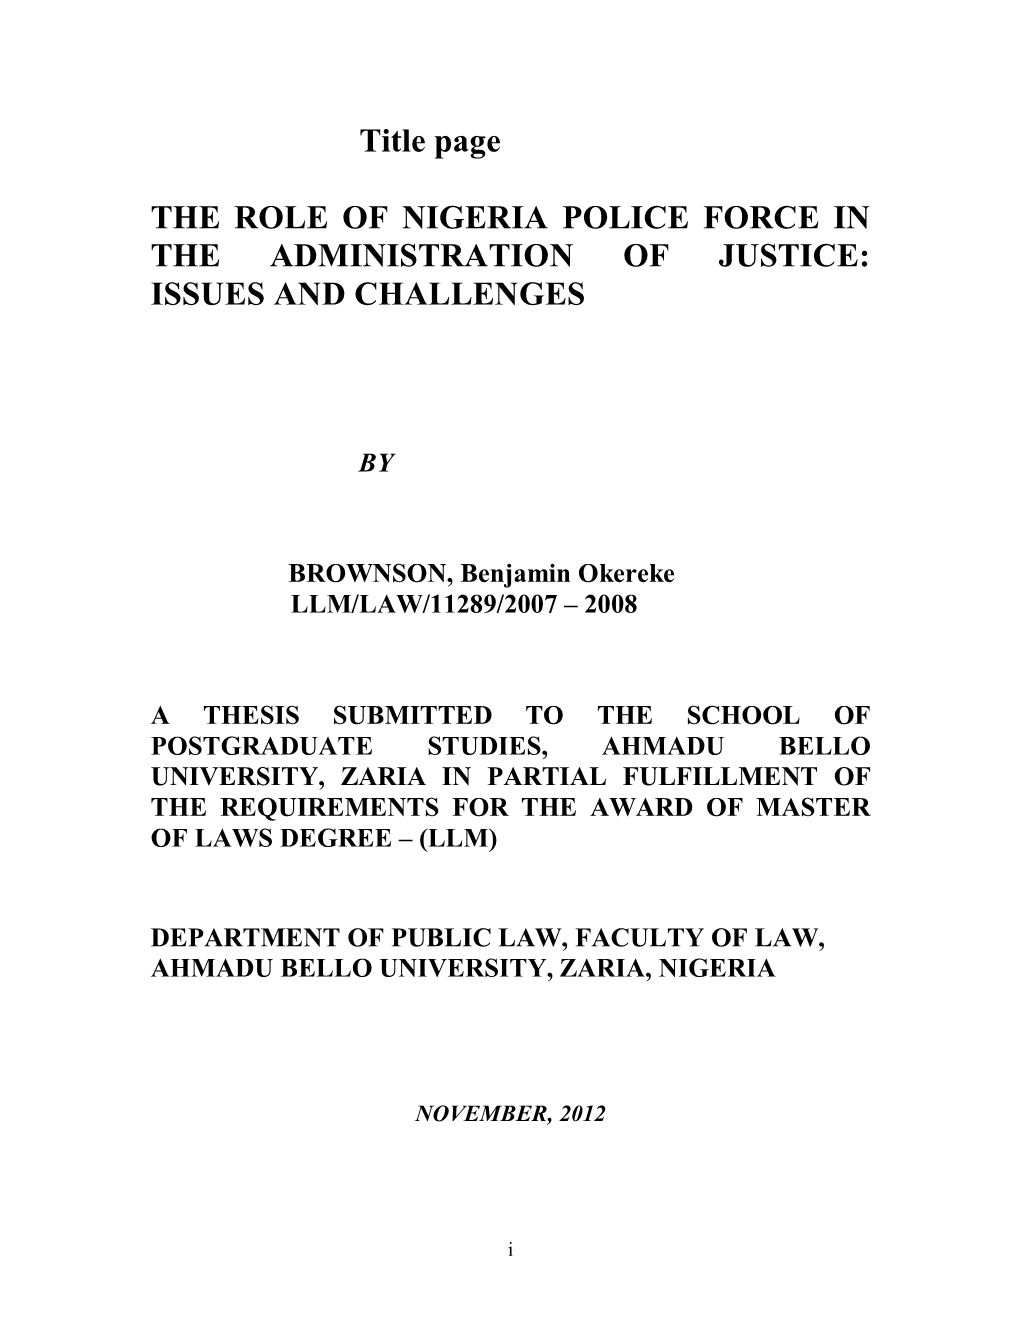 The Role of Nigeria Police Force in the Administration of Justice: Issues and Challenges